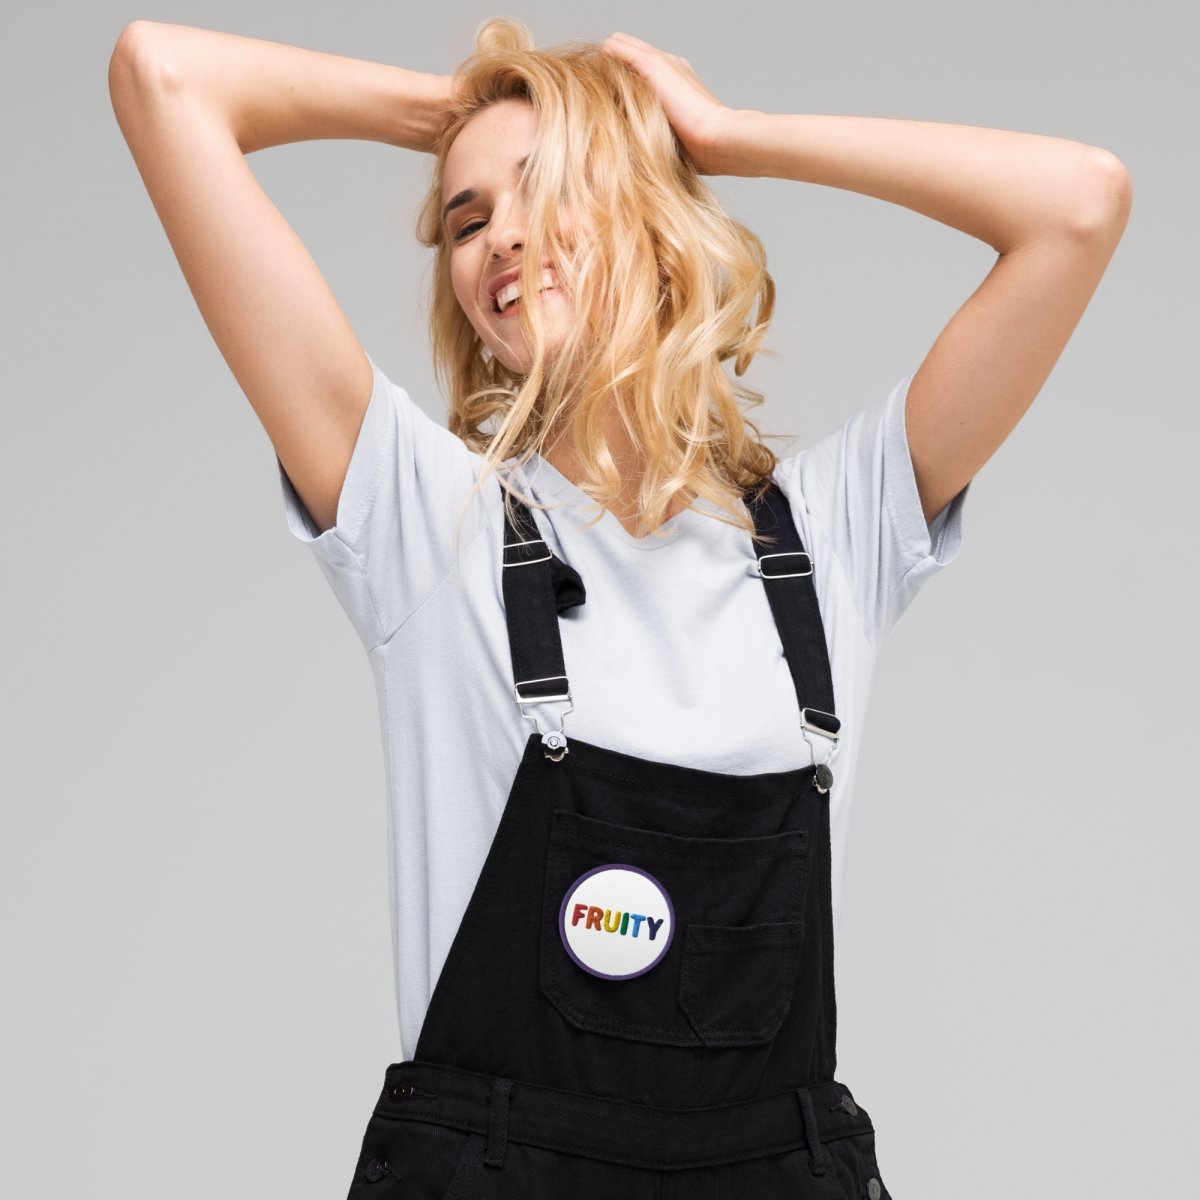 Rainbow Fruity Embroidered Patch - On Trend Shirts